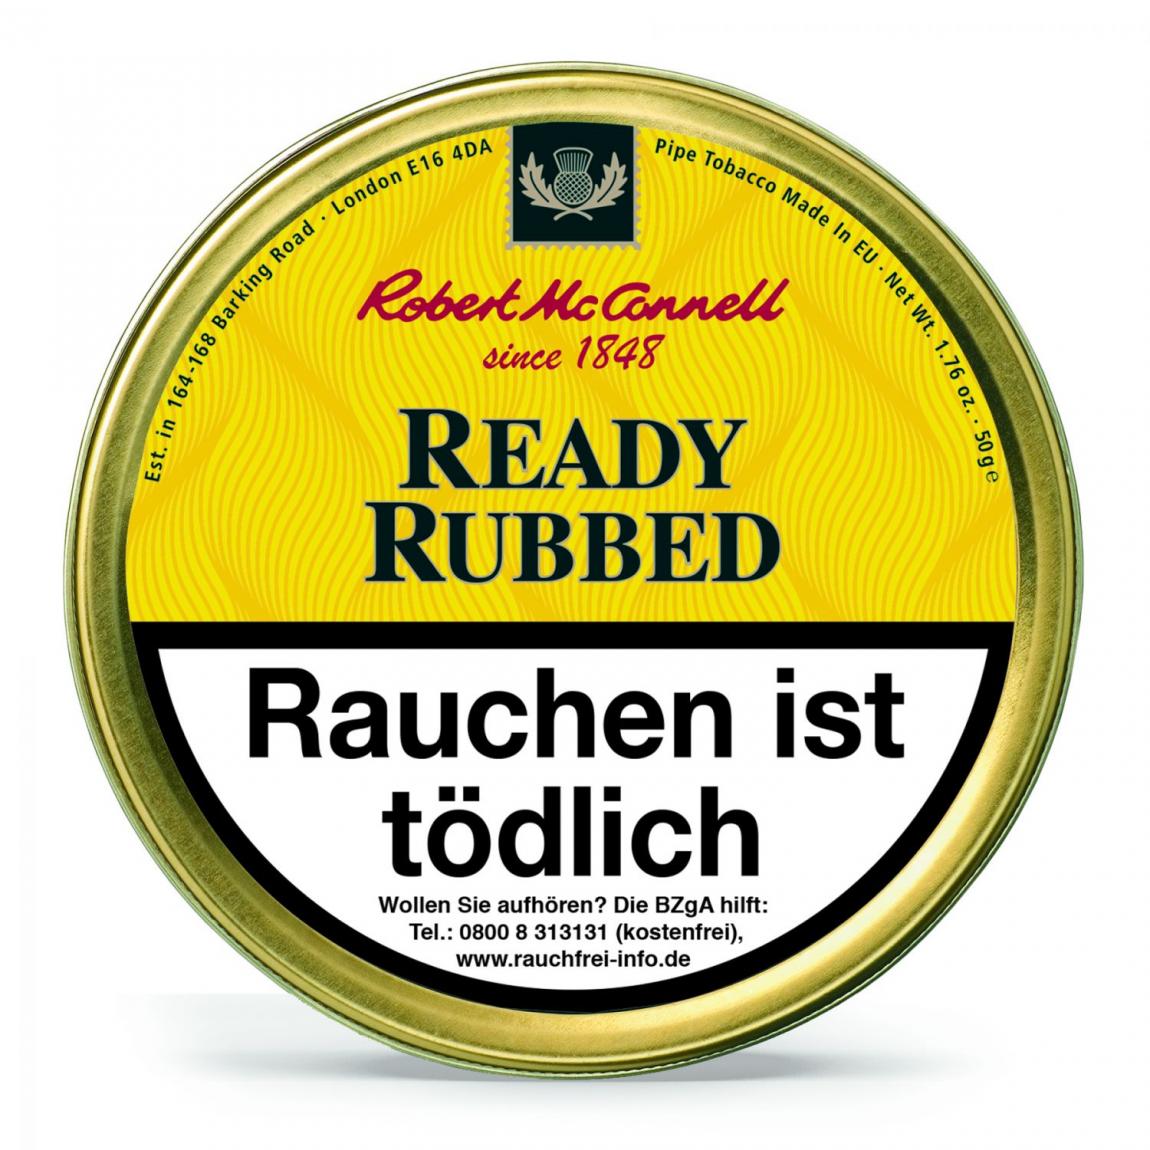 Robert McConnell Heritage »Ready Rubbed«